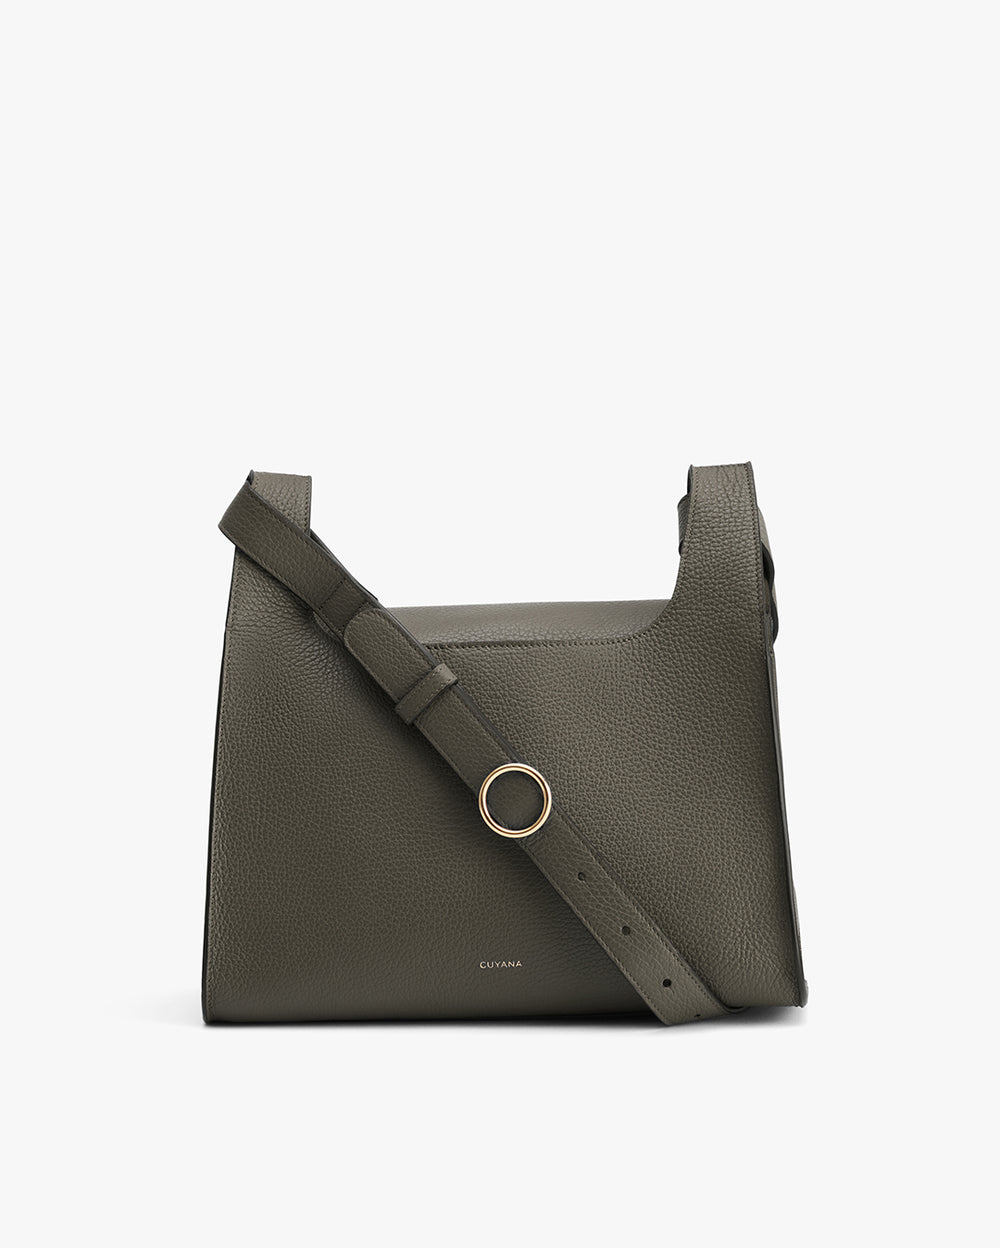 Handbag with a shoulder strap and central metal ring detail